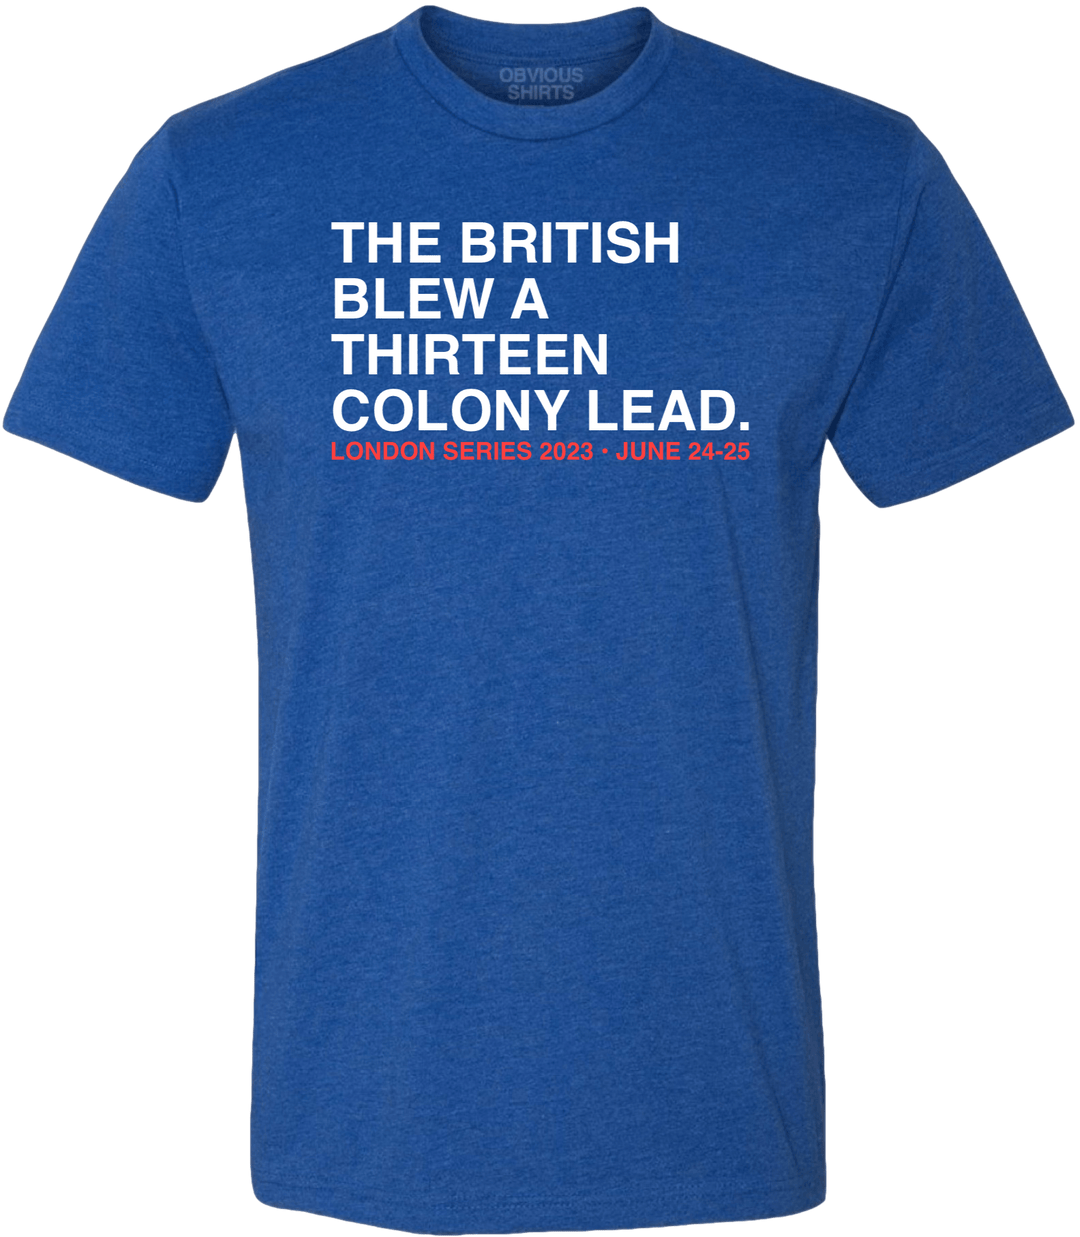 THE BRITISH BLEW A THIRTEEN COLONY LEAD. (LONDON SERIES) - OBVIOUS SHIRTS